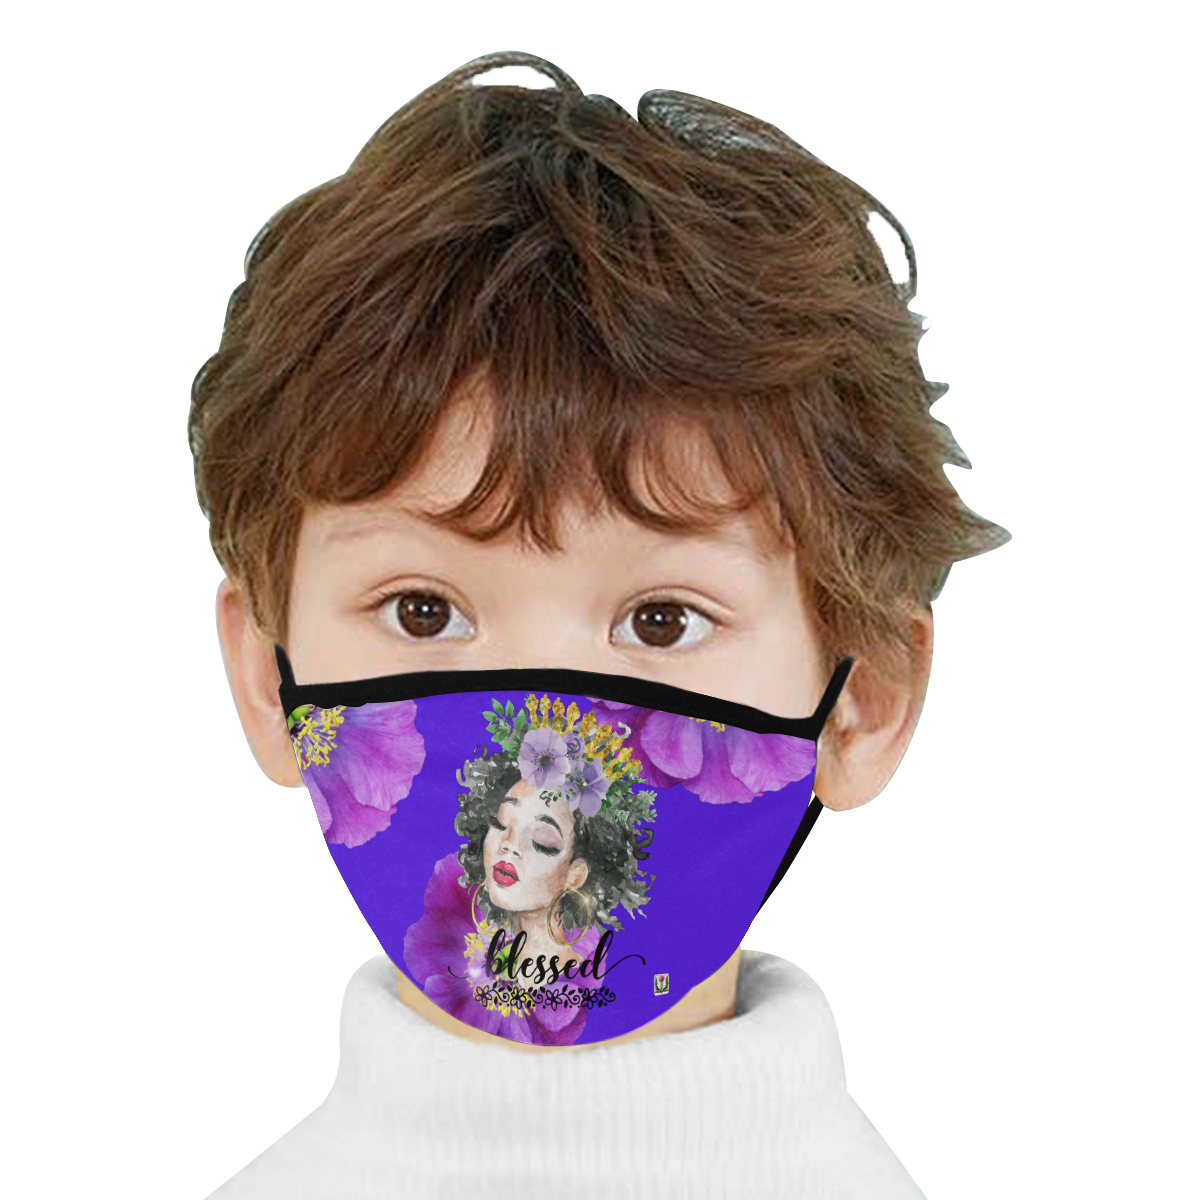 Fairlings Delight's The Word Collection- Blessed 53086a6 Mouth Mask